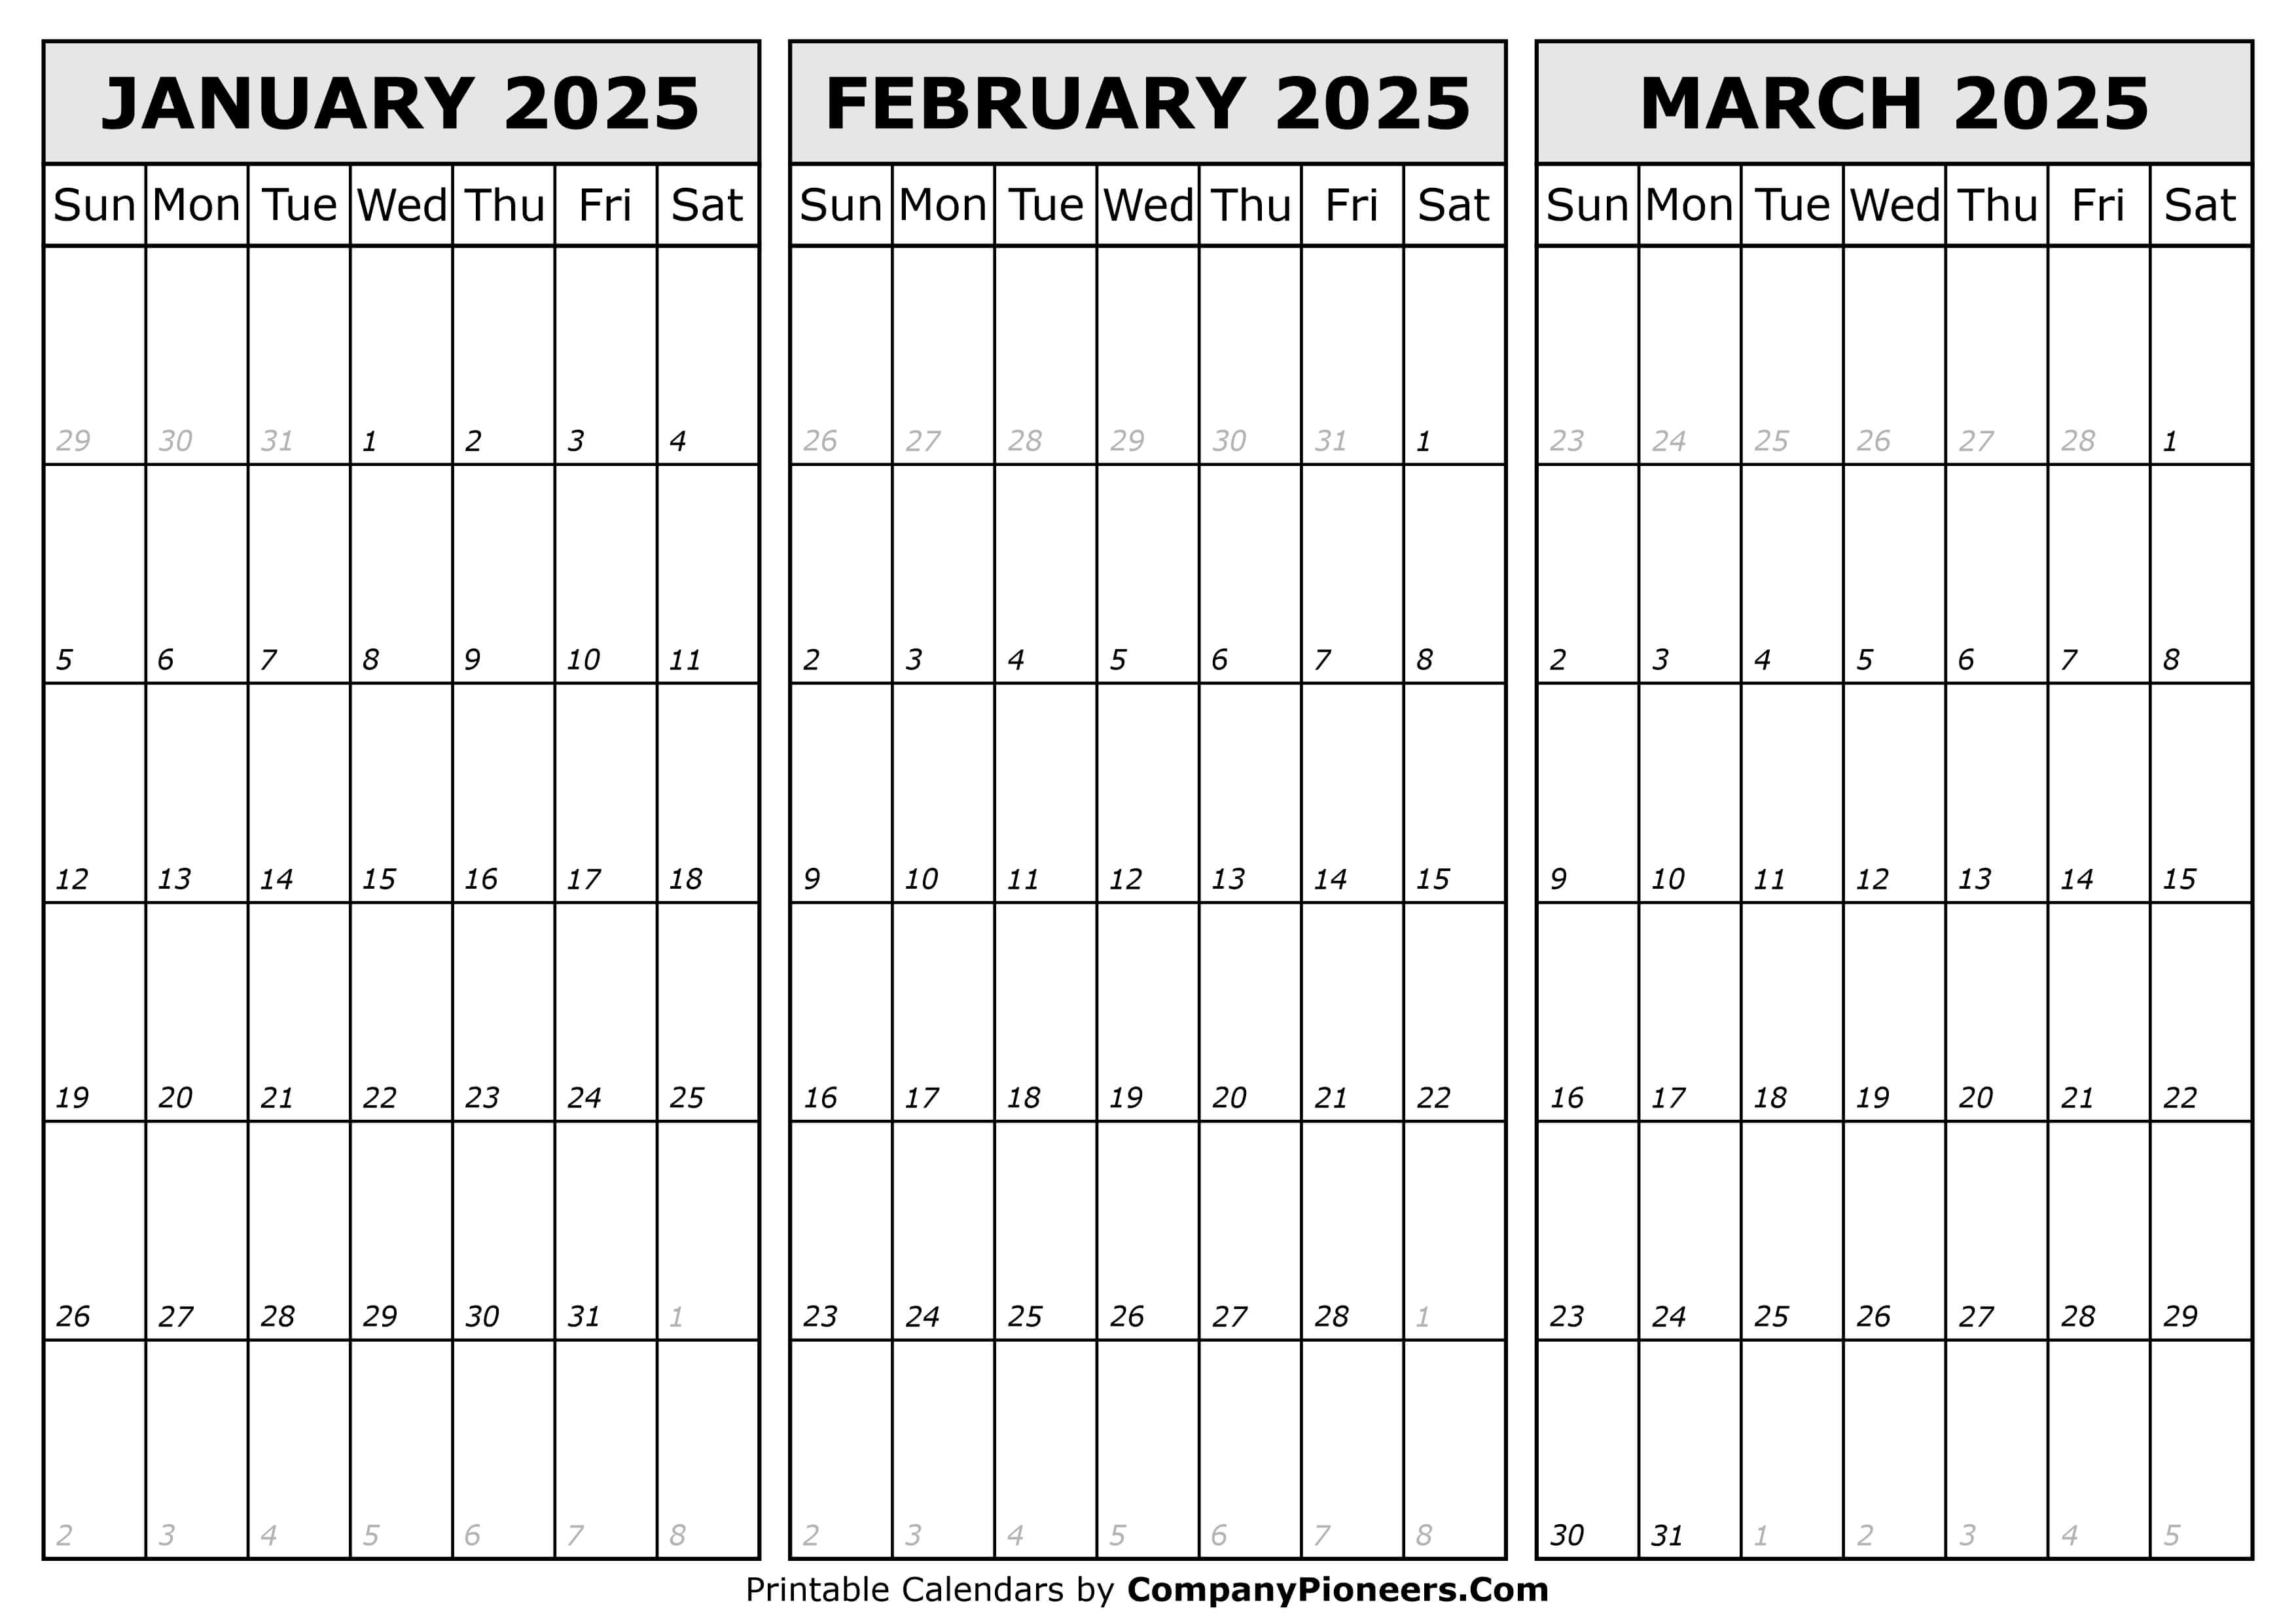 Calendar January to March 2025